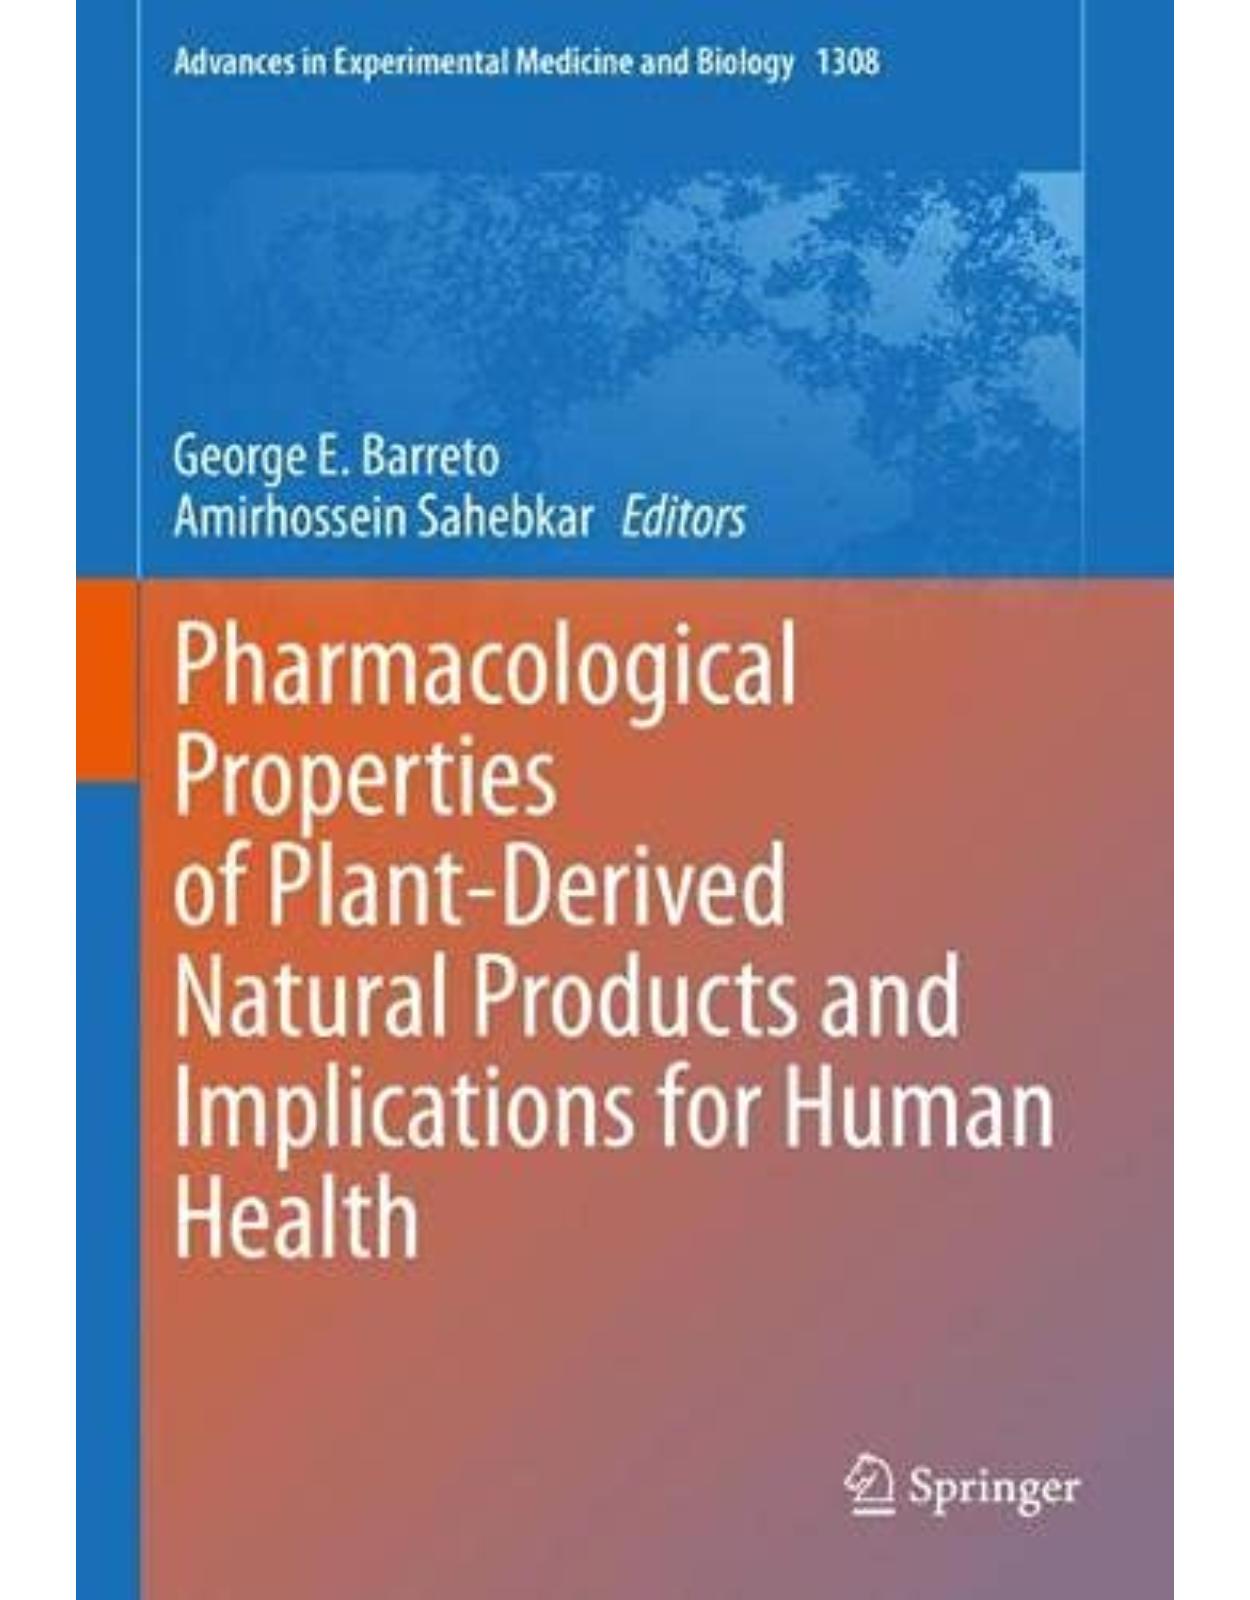 Pharmacological Properties of Plant-Derived Natural Products and Implications for Human Health: 1308